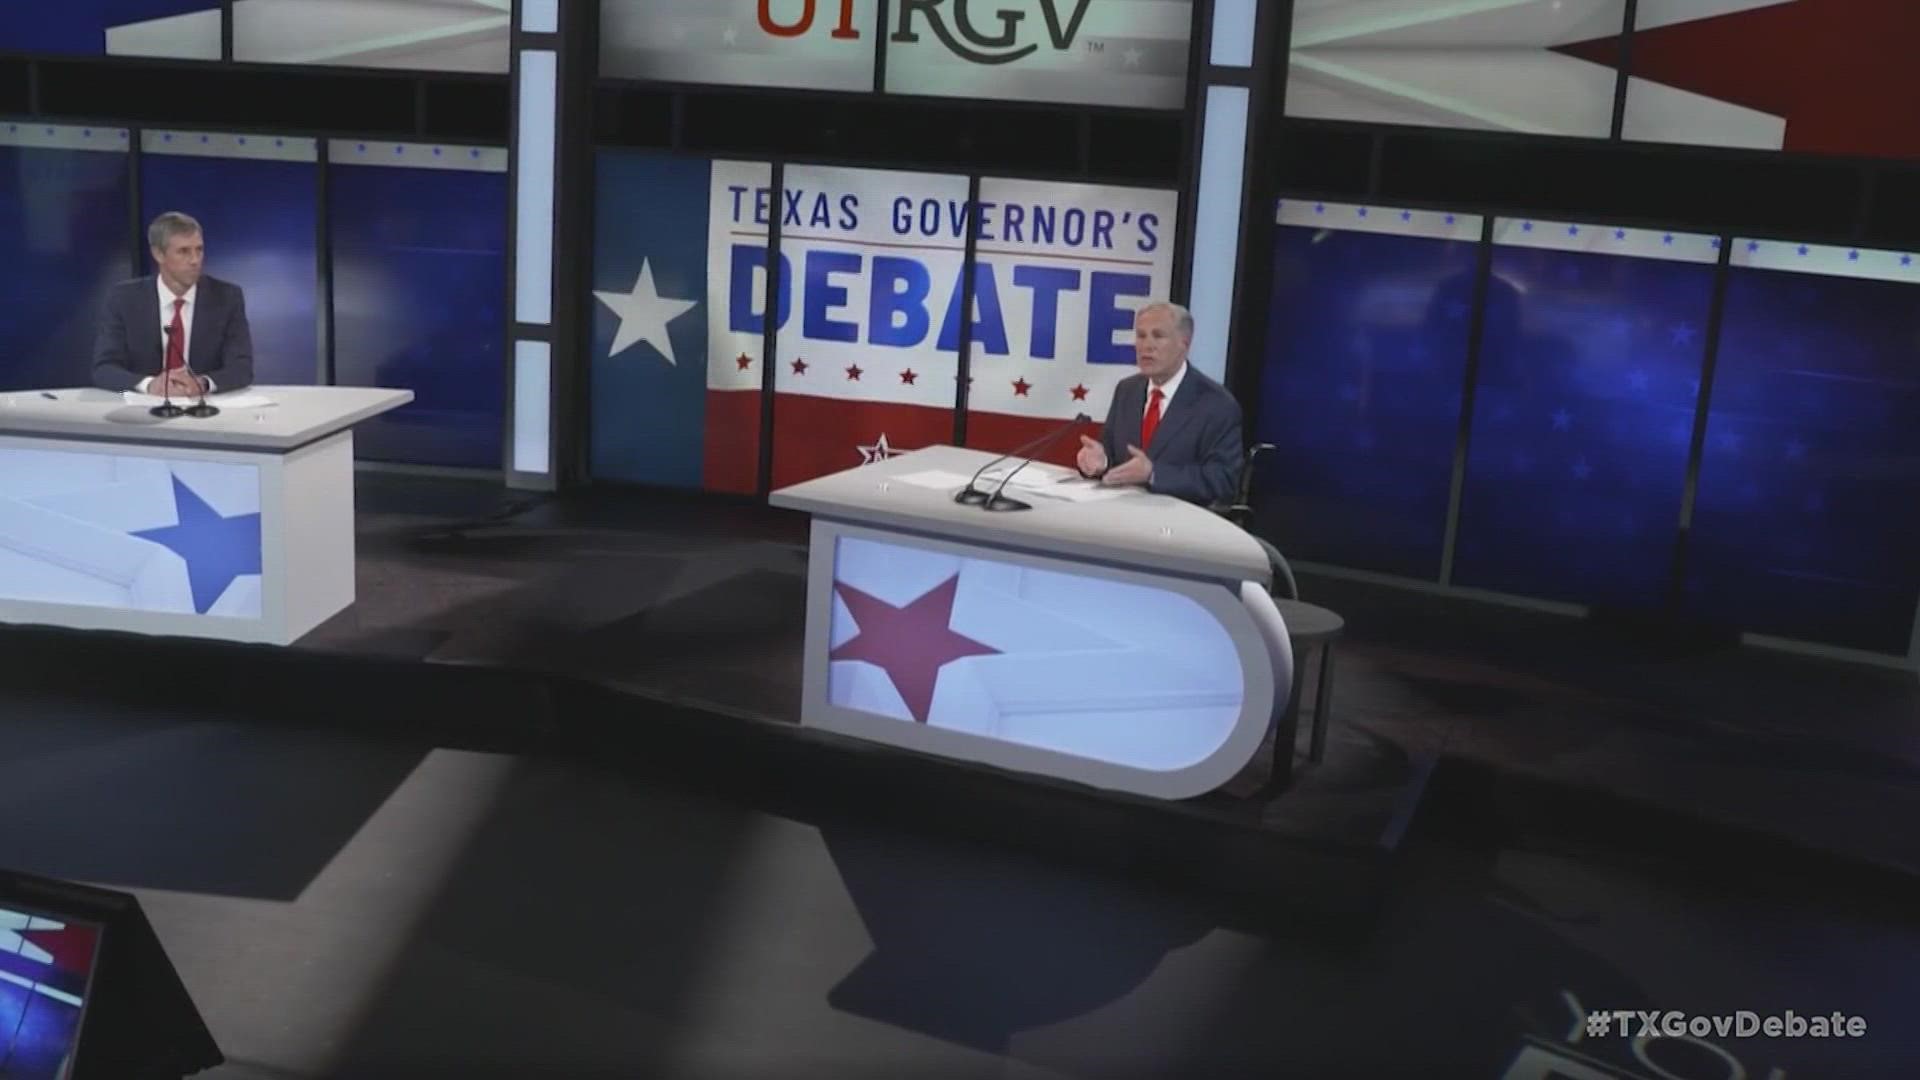 Gov. Abbott and Beto O'Rourke went head-to-head in the first and likely only gubernatorial debate Friday.